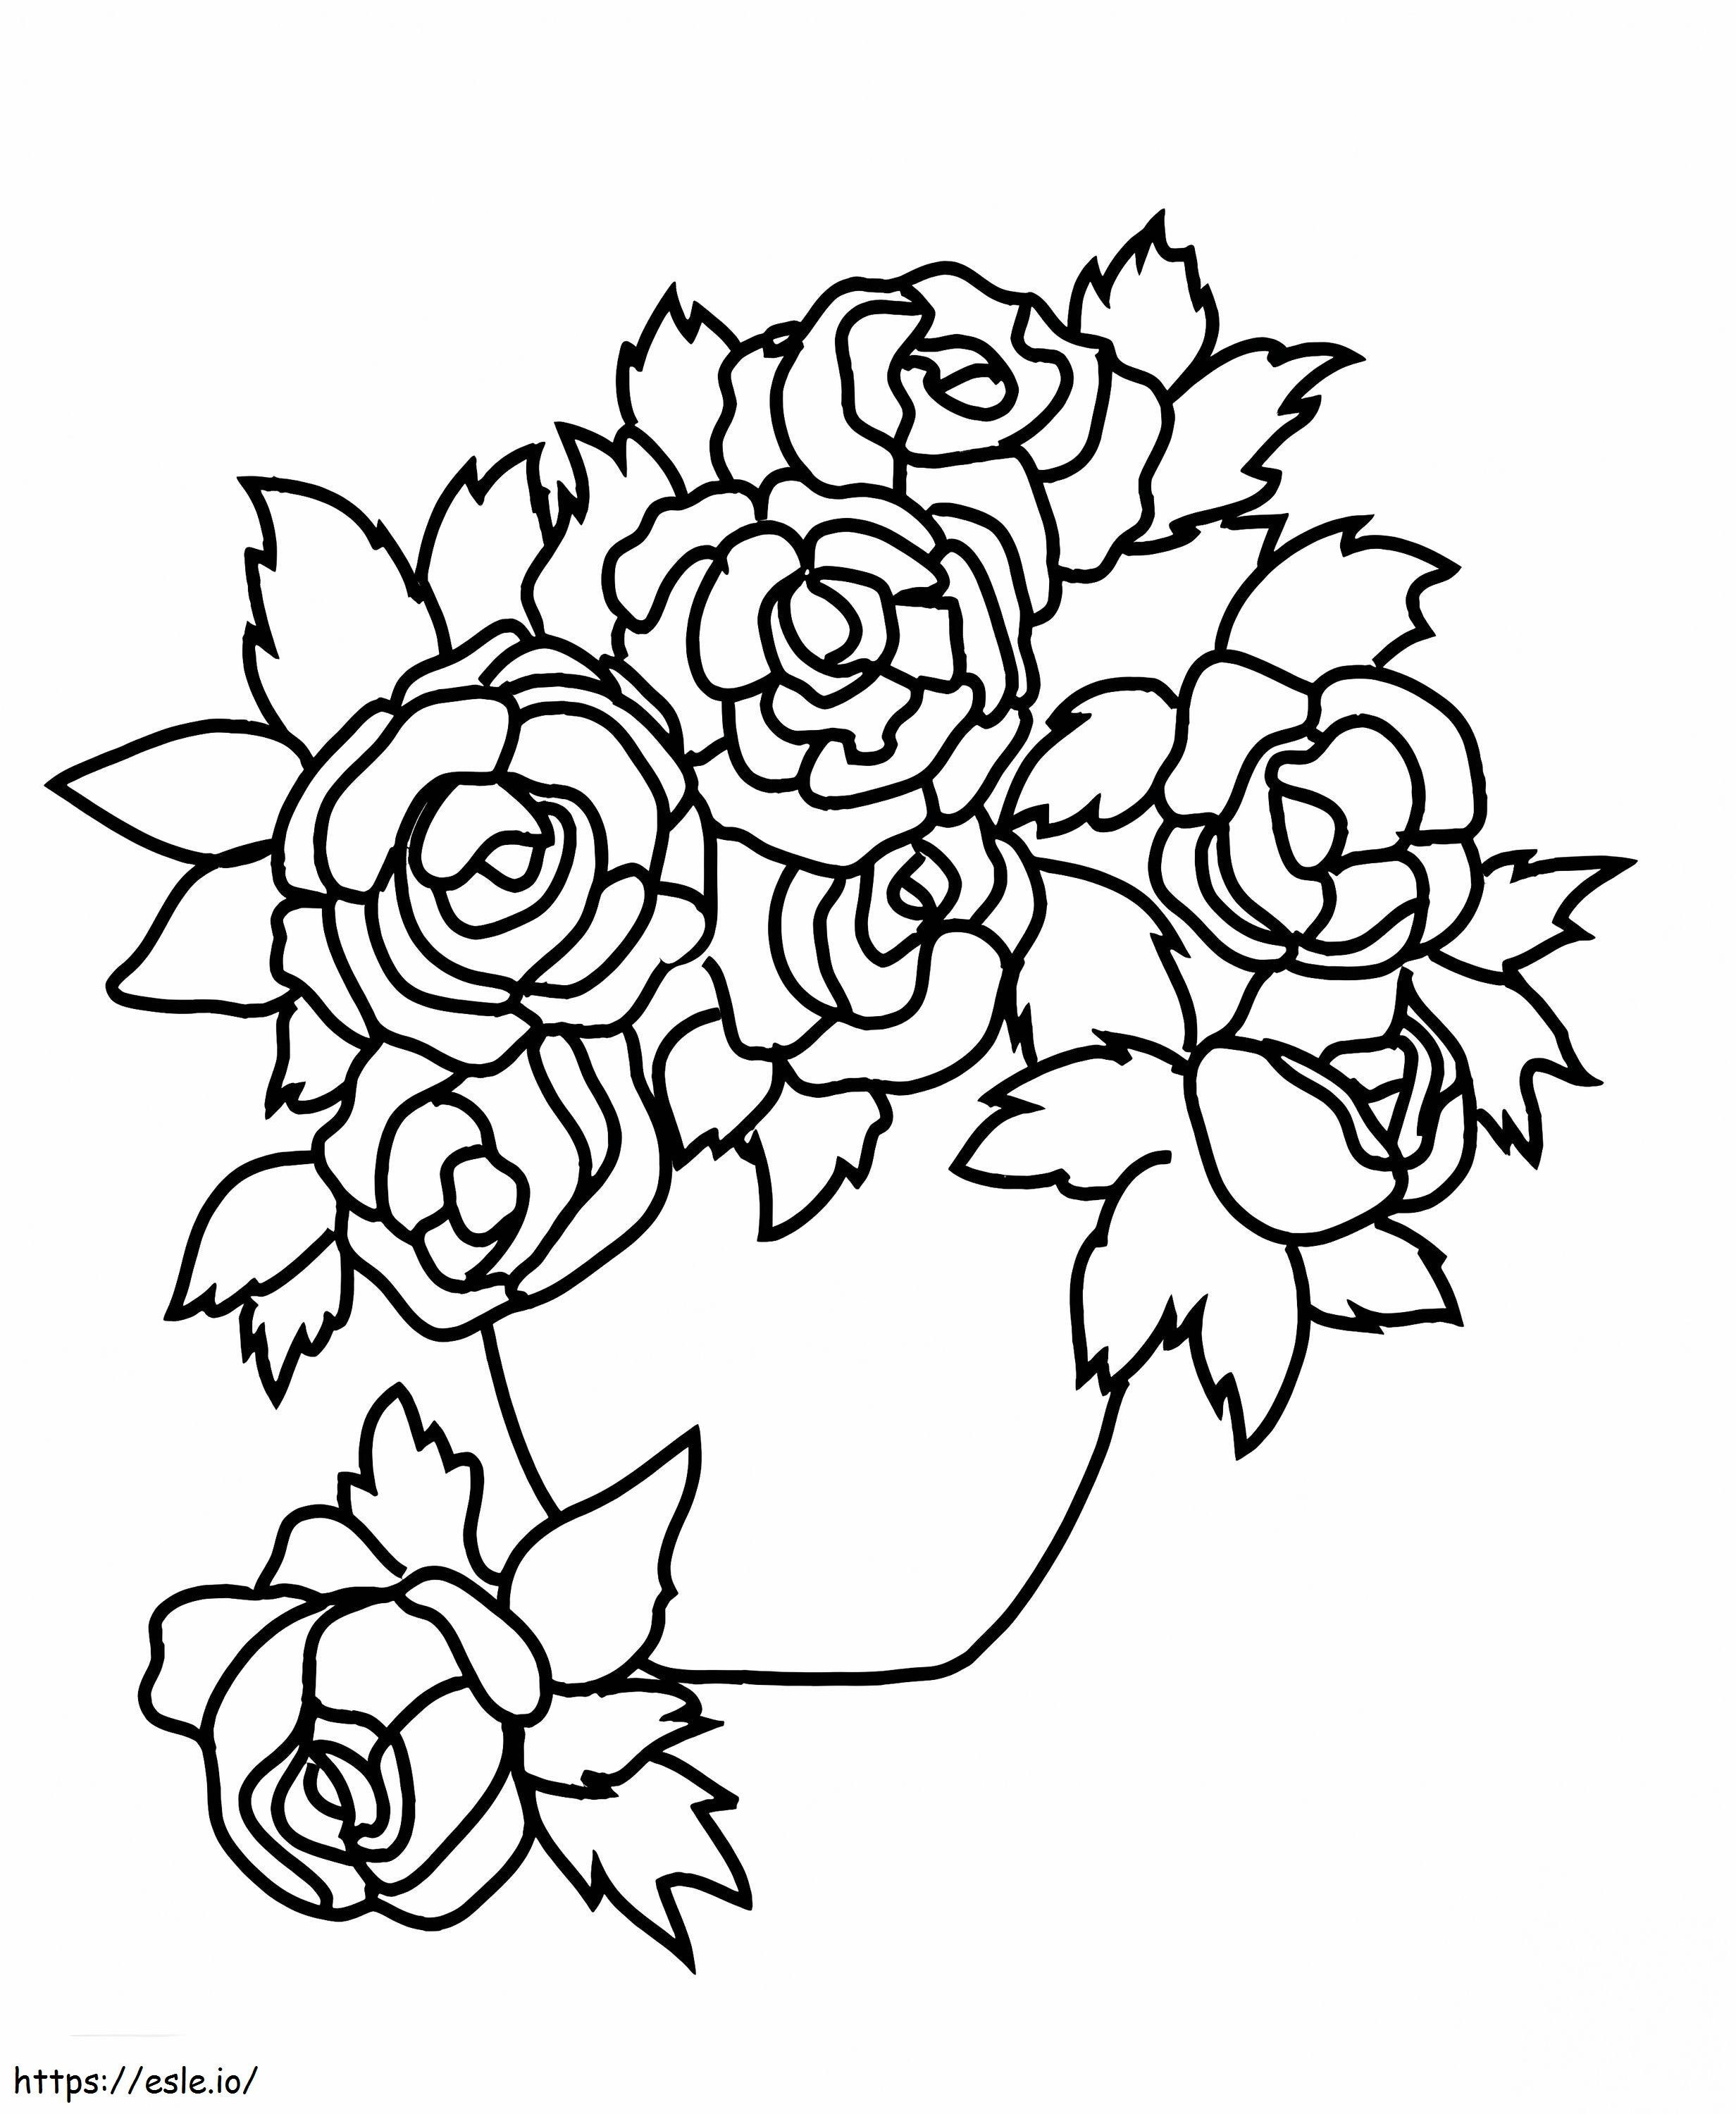 Flower Vase 8 coloring page